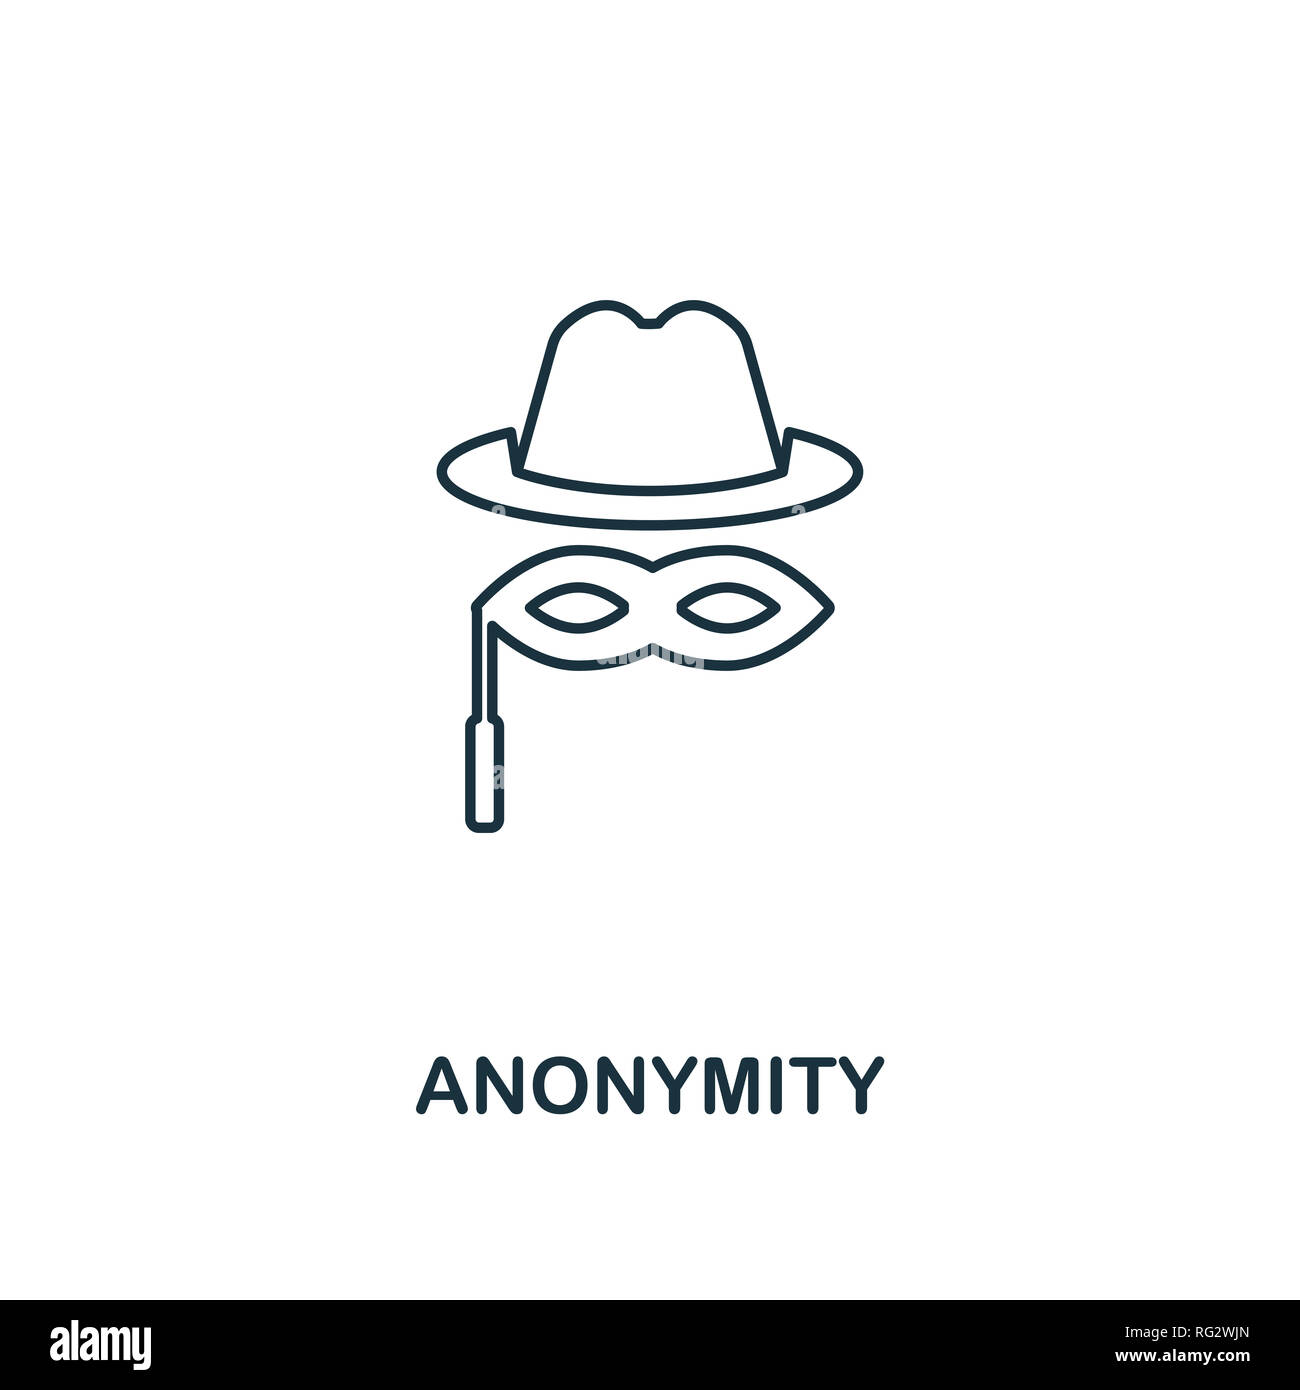 Anonymity outline icon. Thin line style design from blockchain collection. Creative anonymity icon for web design, apps, software, printing usage. Stock Photo